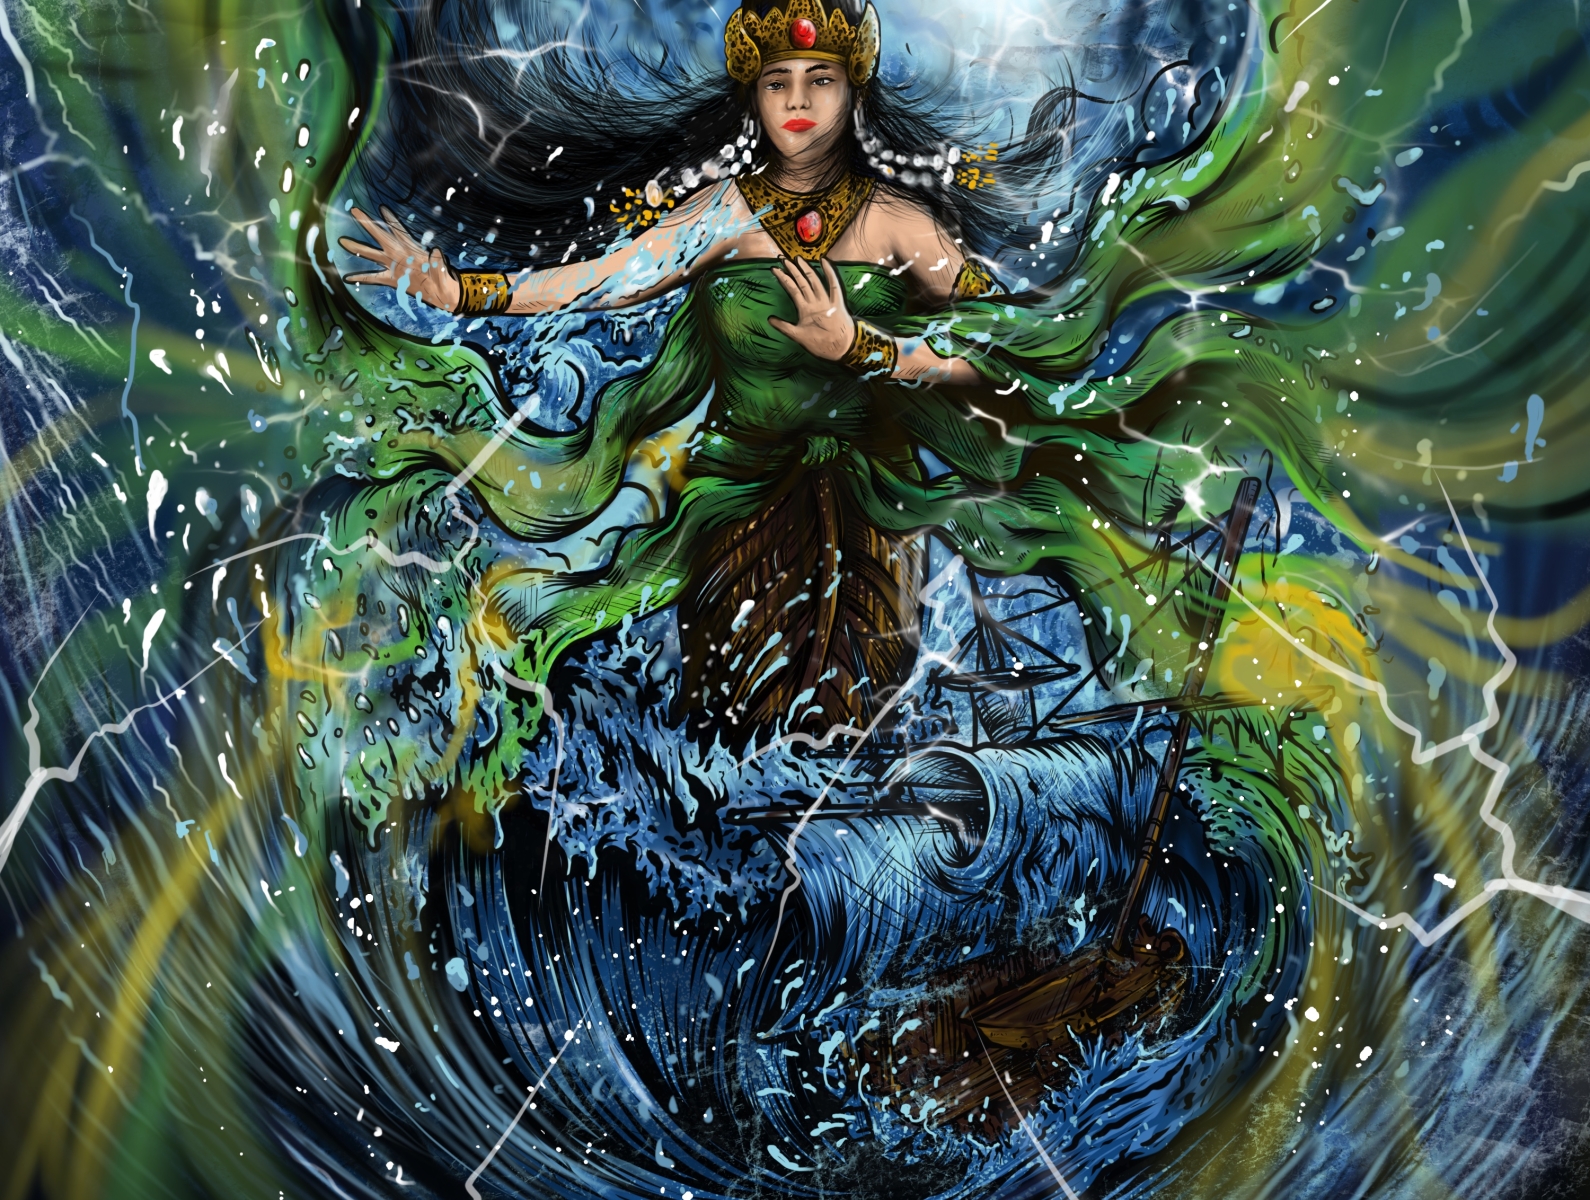  The image shows a painting of Nyi Roro Kidul, the legendary Queen of the South Sea in Javanese mythology, with long black hair, wearing a green dress and a golden crown, standing amidst stormy seas.